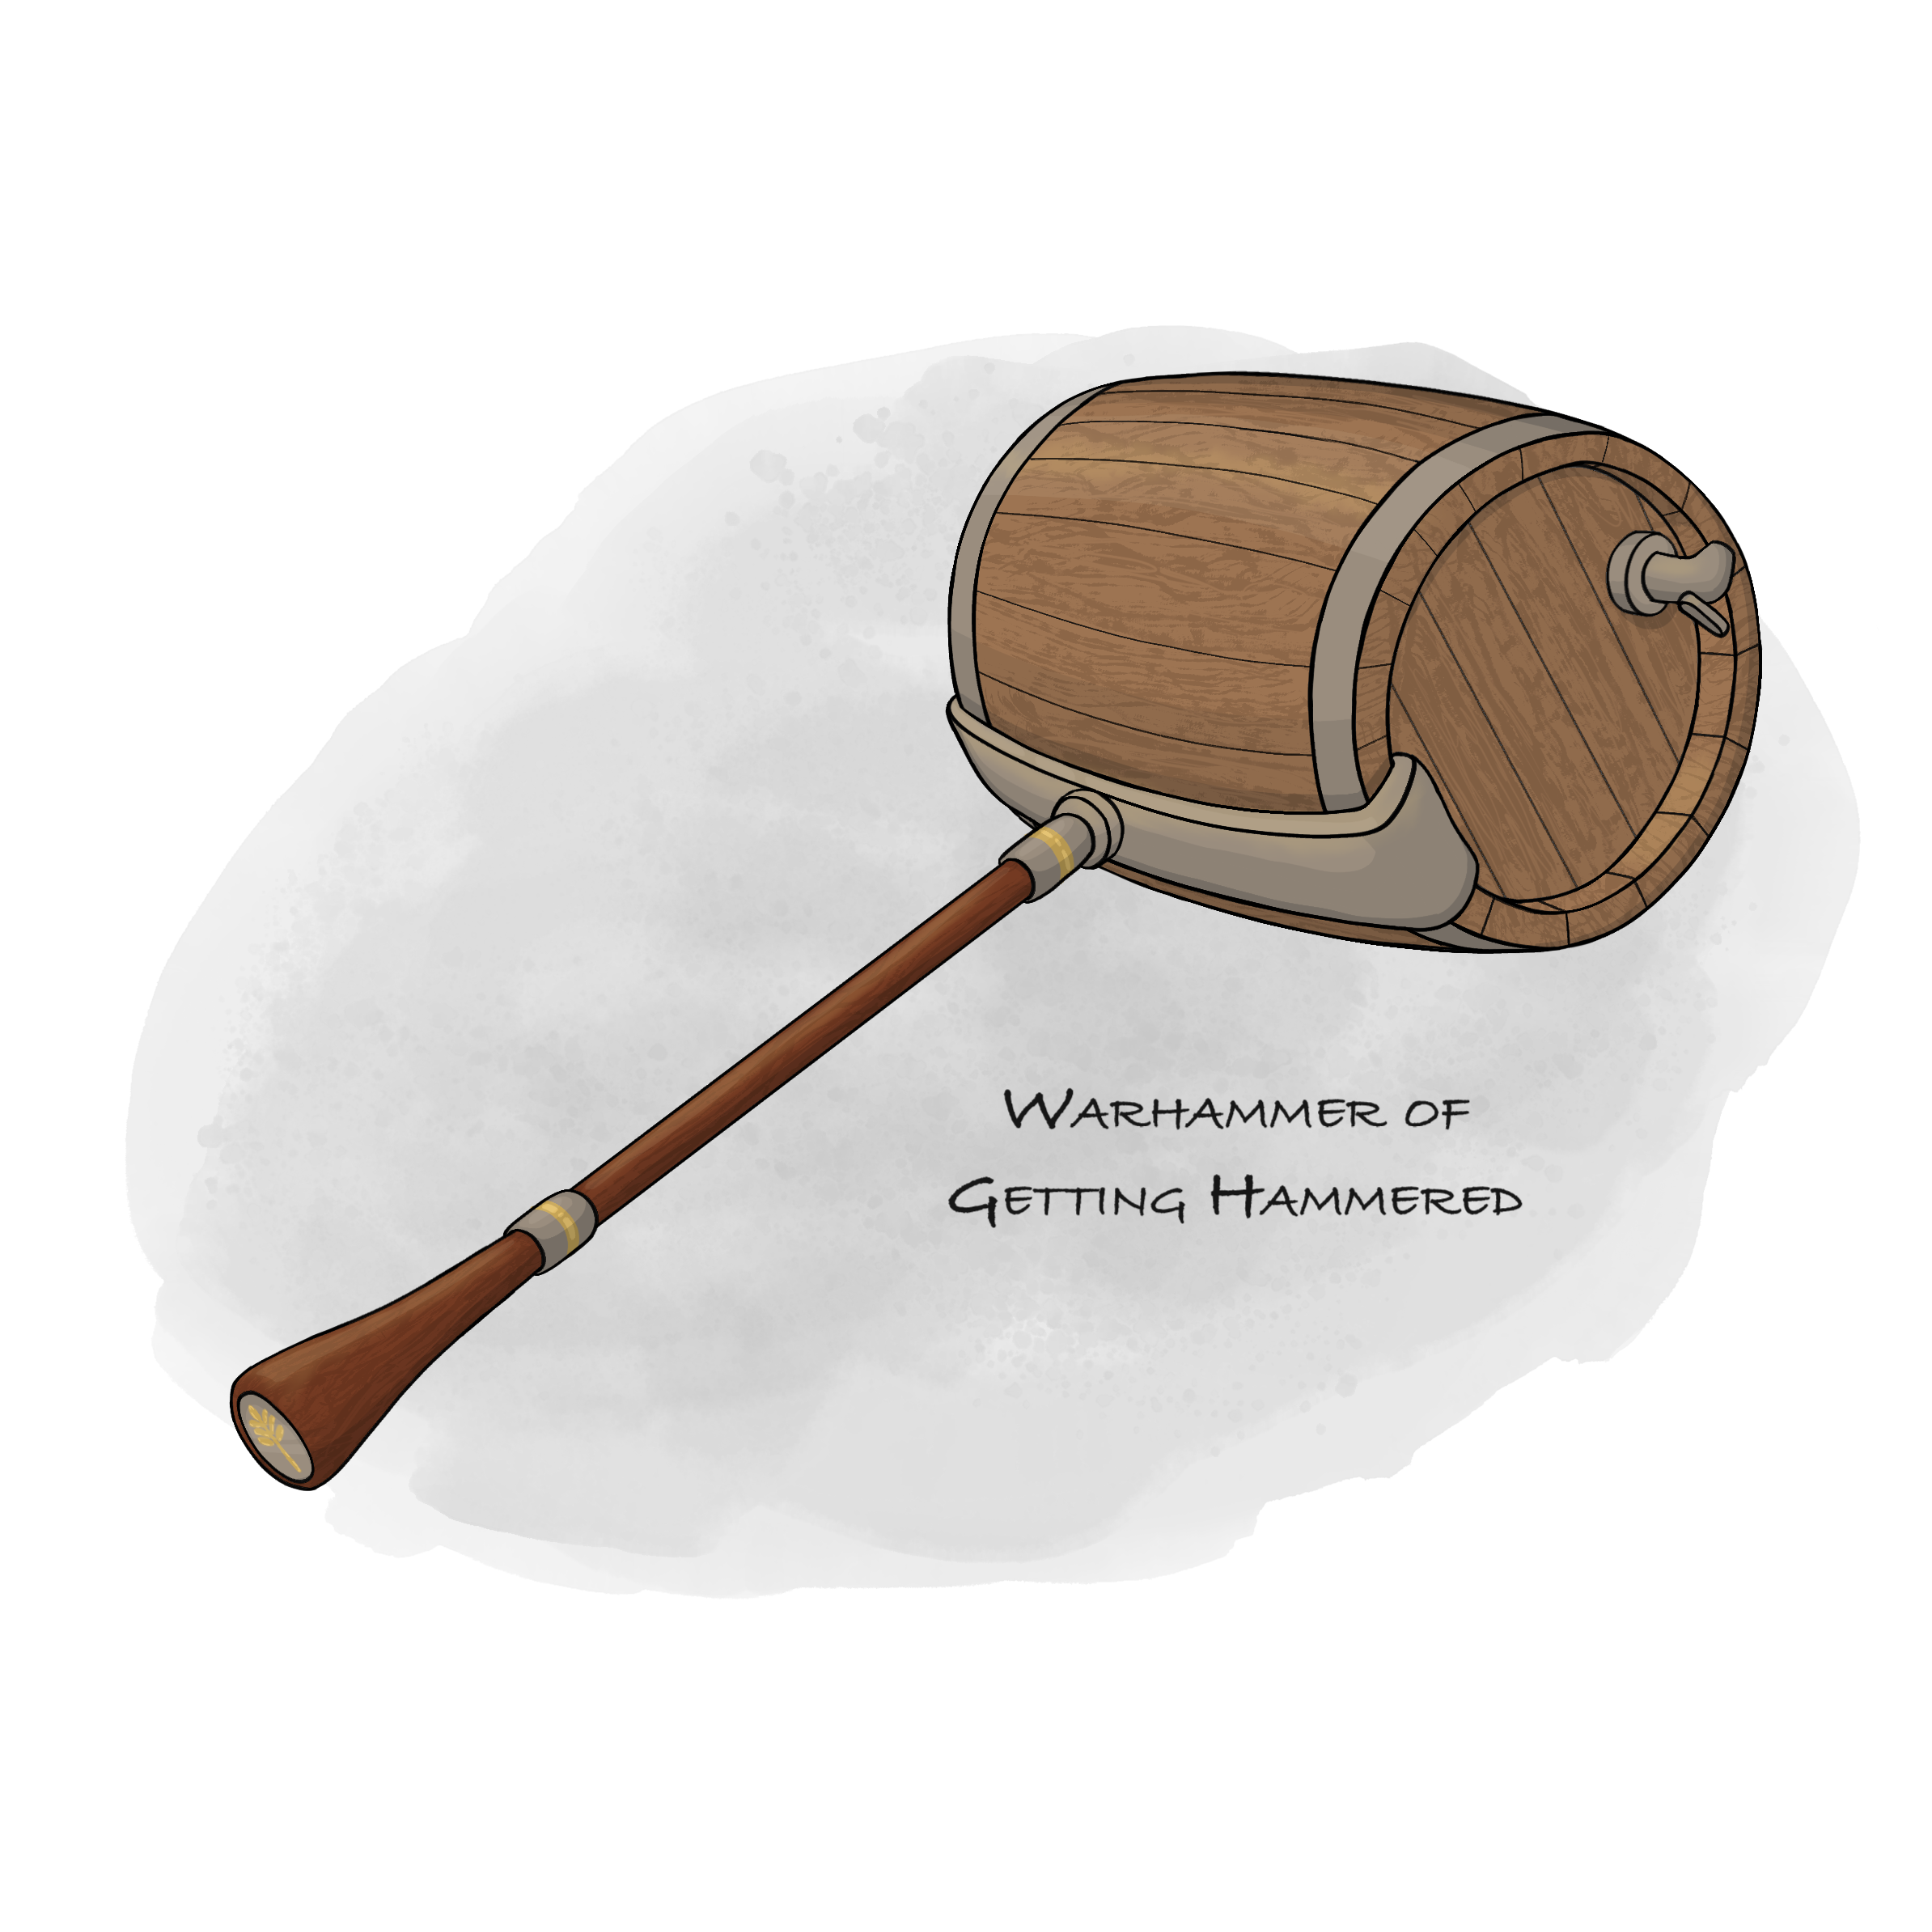 The Warhammer of Getting Hammered drawn by Wing-Sum